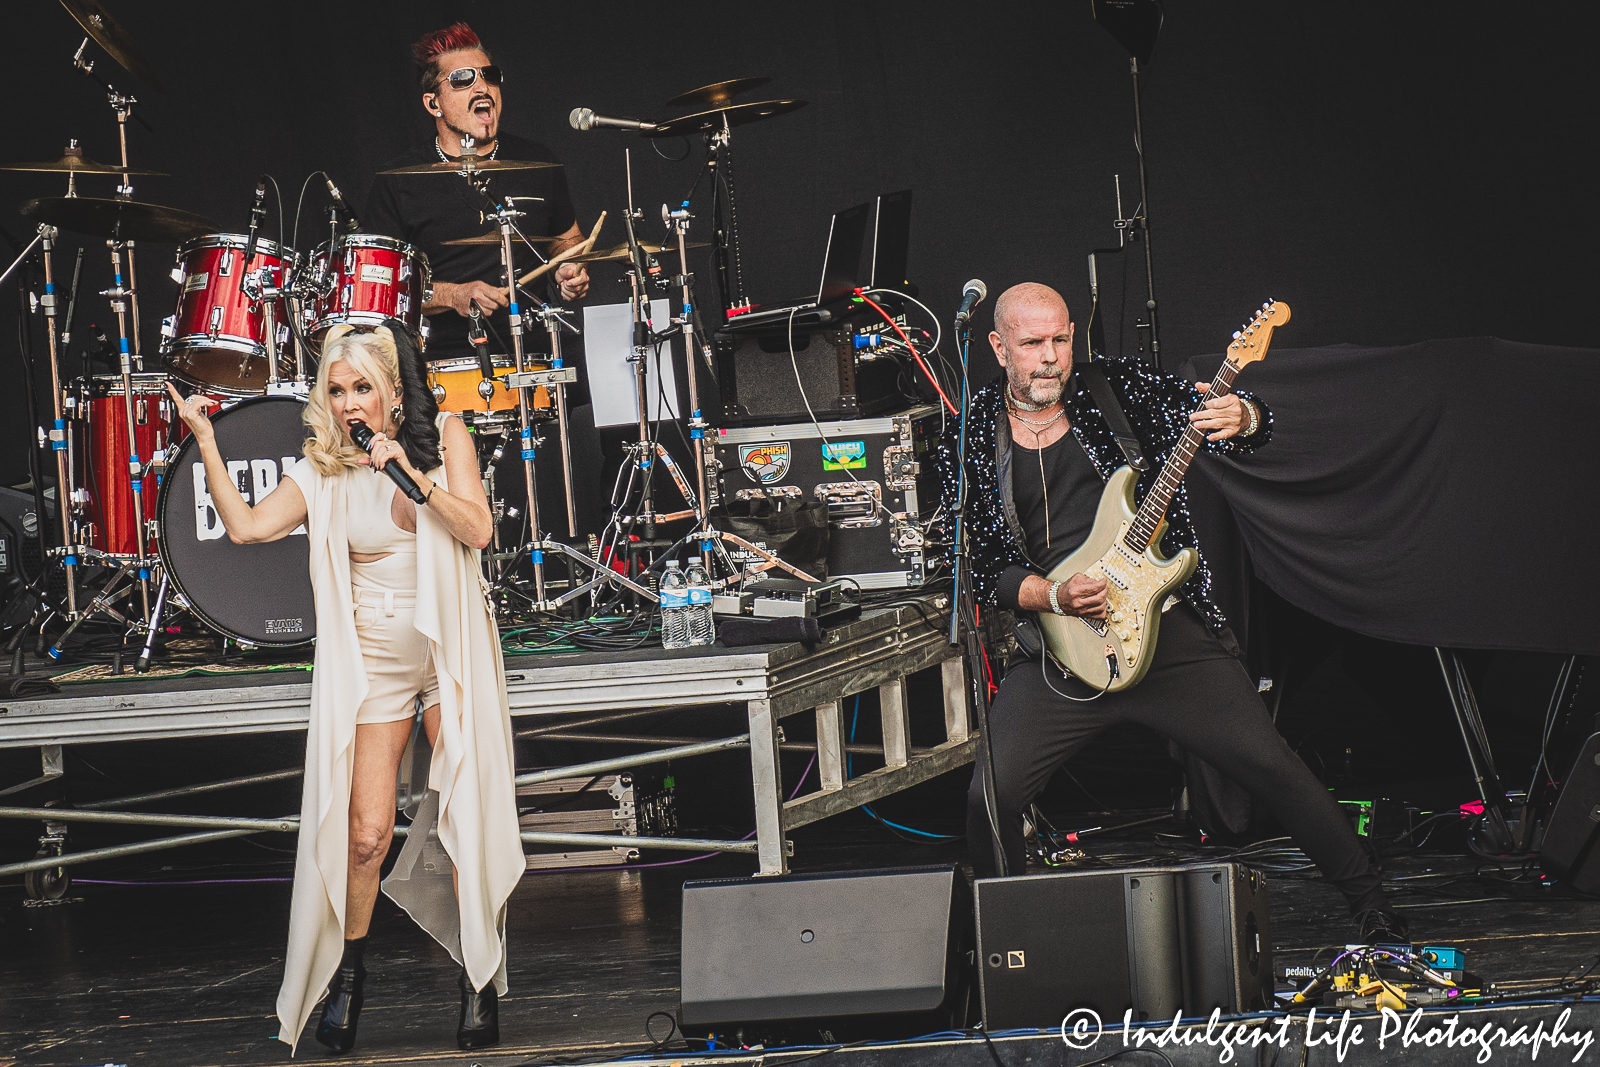 Berlin band members Terri Nunn, Ric "Rocc" Roccapriore and David Diamond playing together at Starlight Theatre in Kansas City, MO on August 8, 2023.